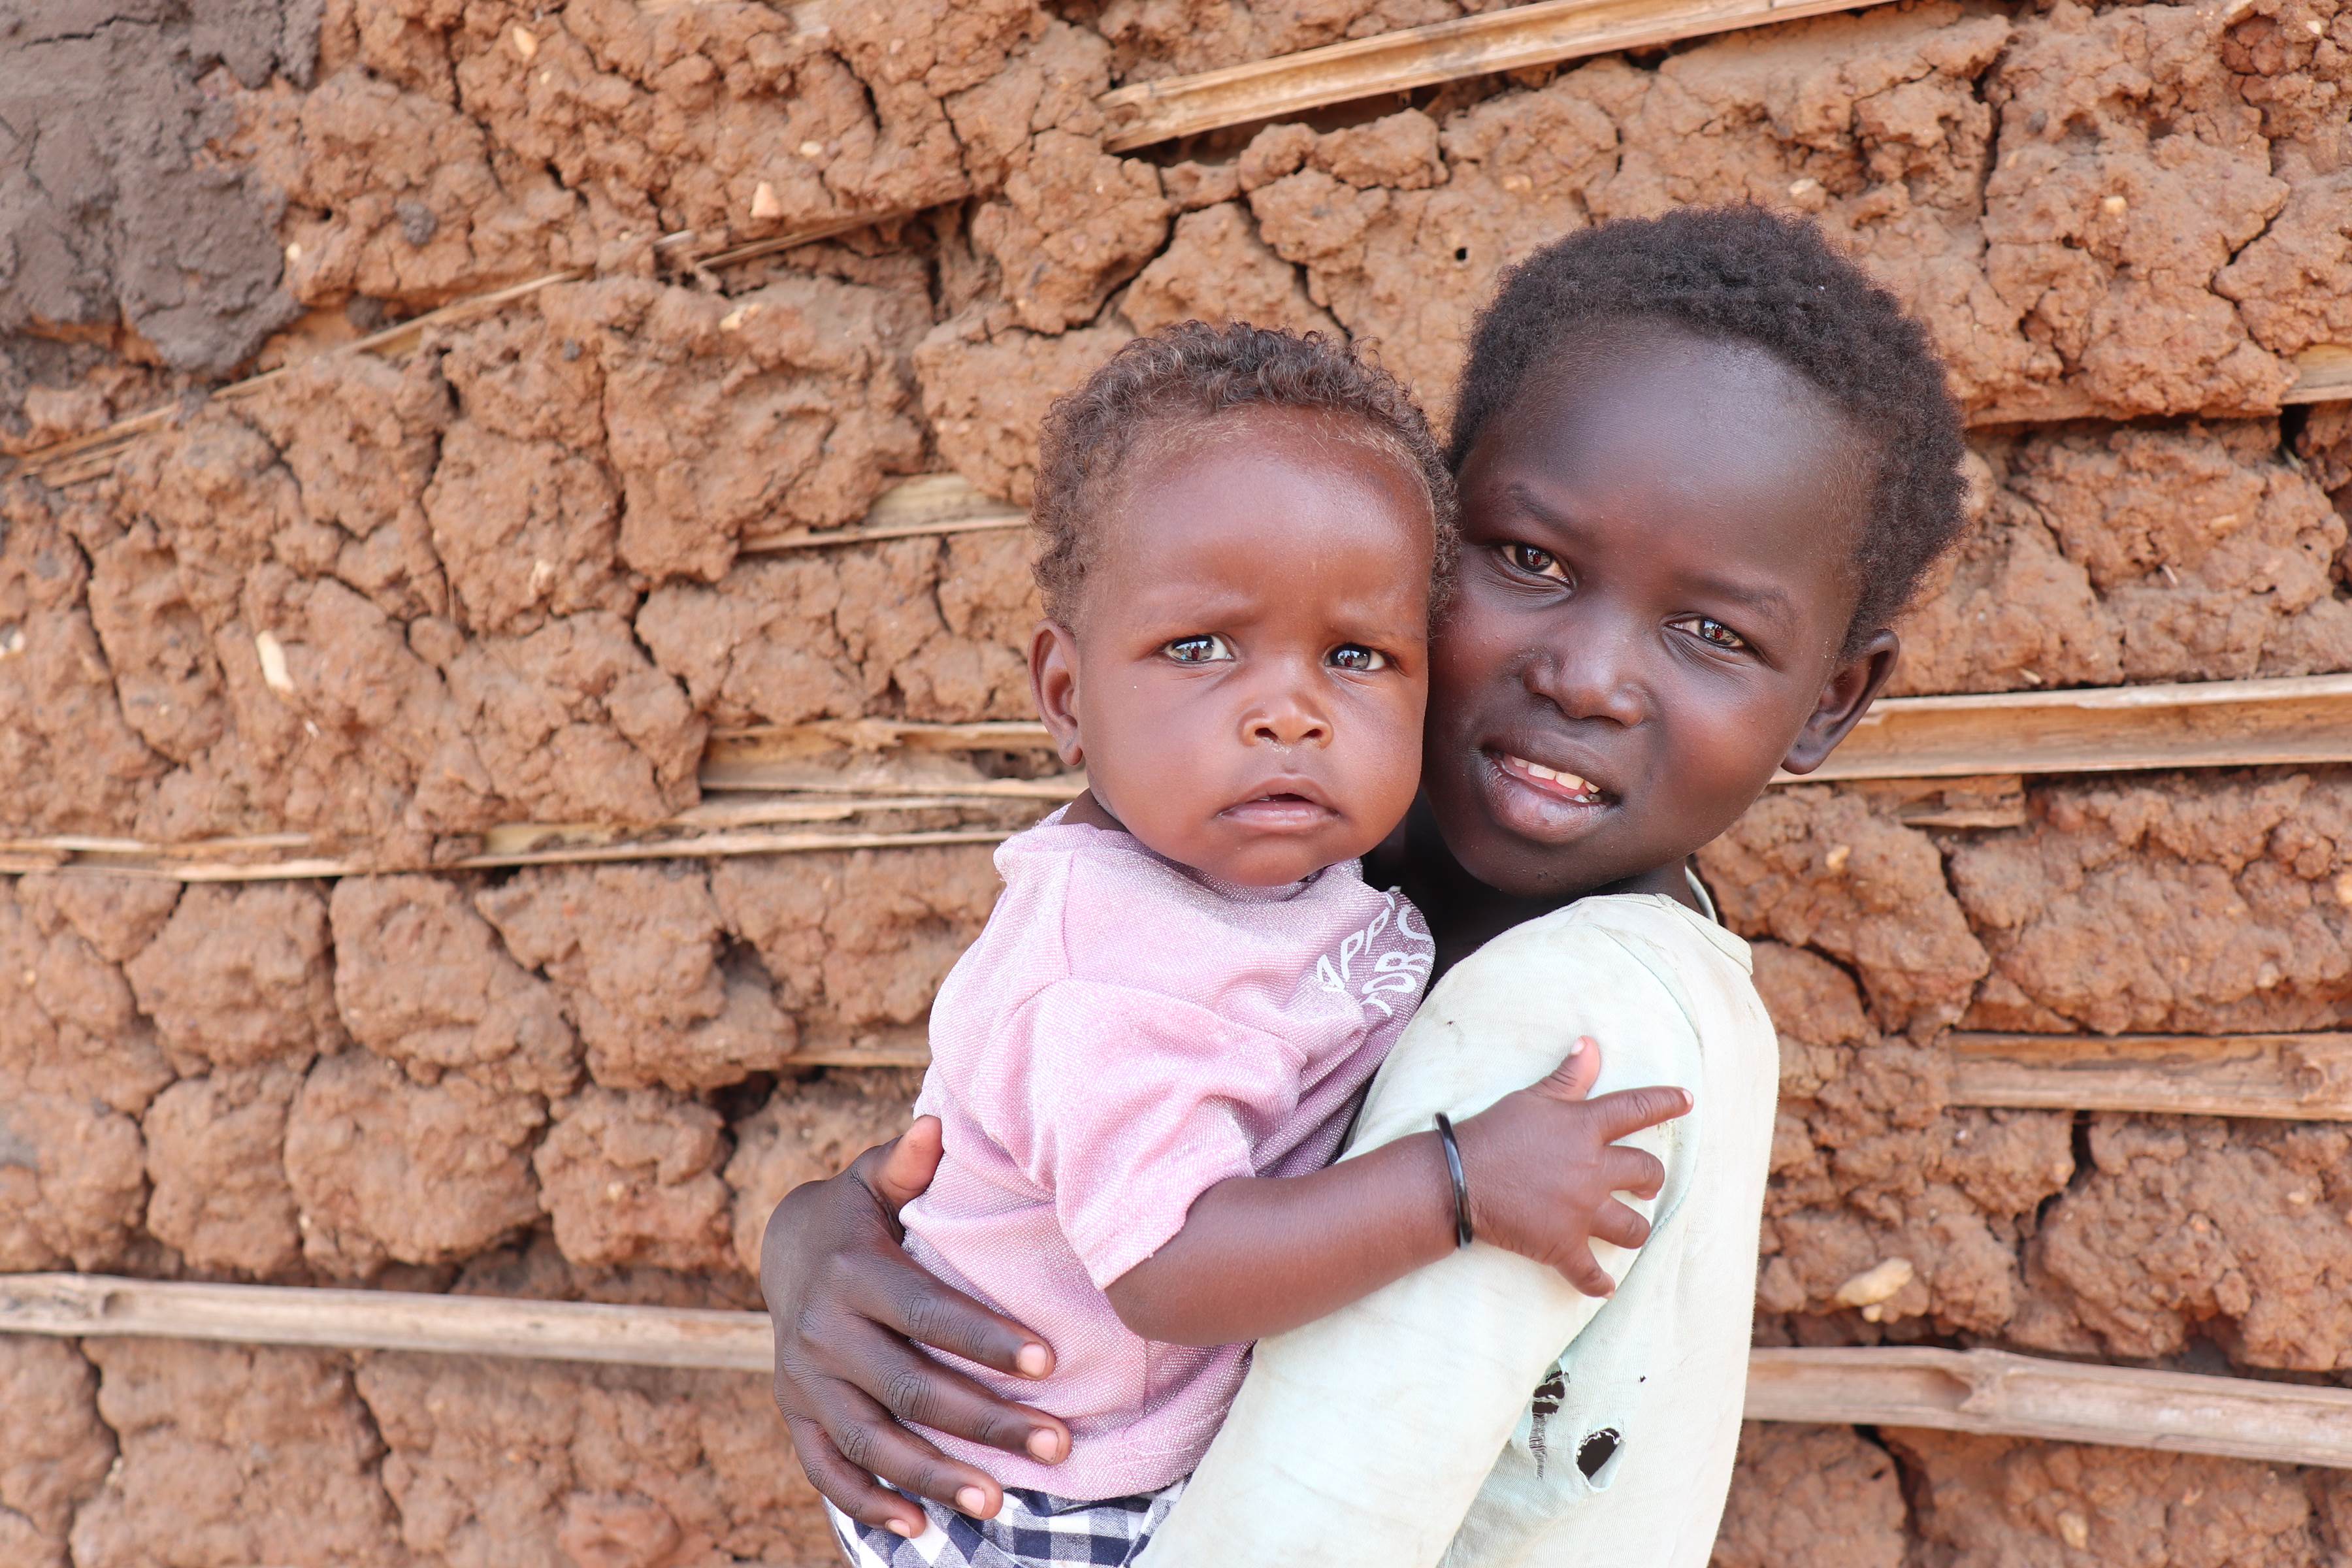 Eight month year old child in South Sudan hugs older child holding them, standing in front of a wall